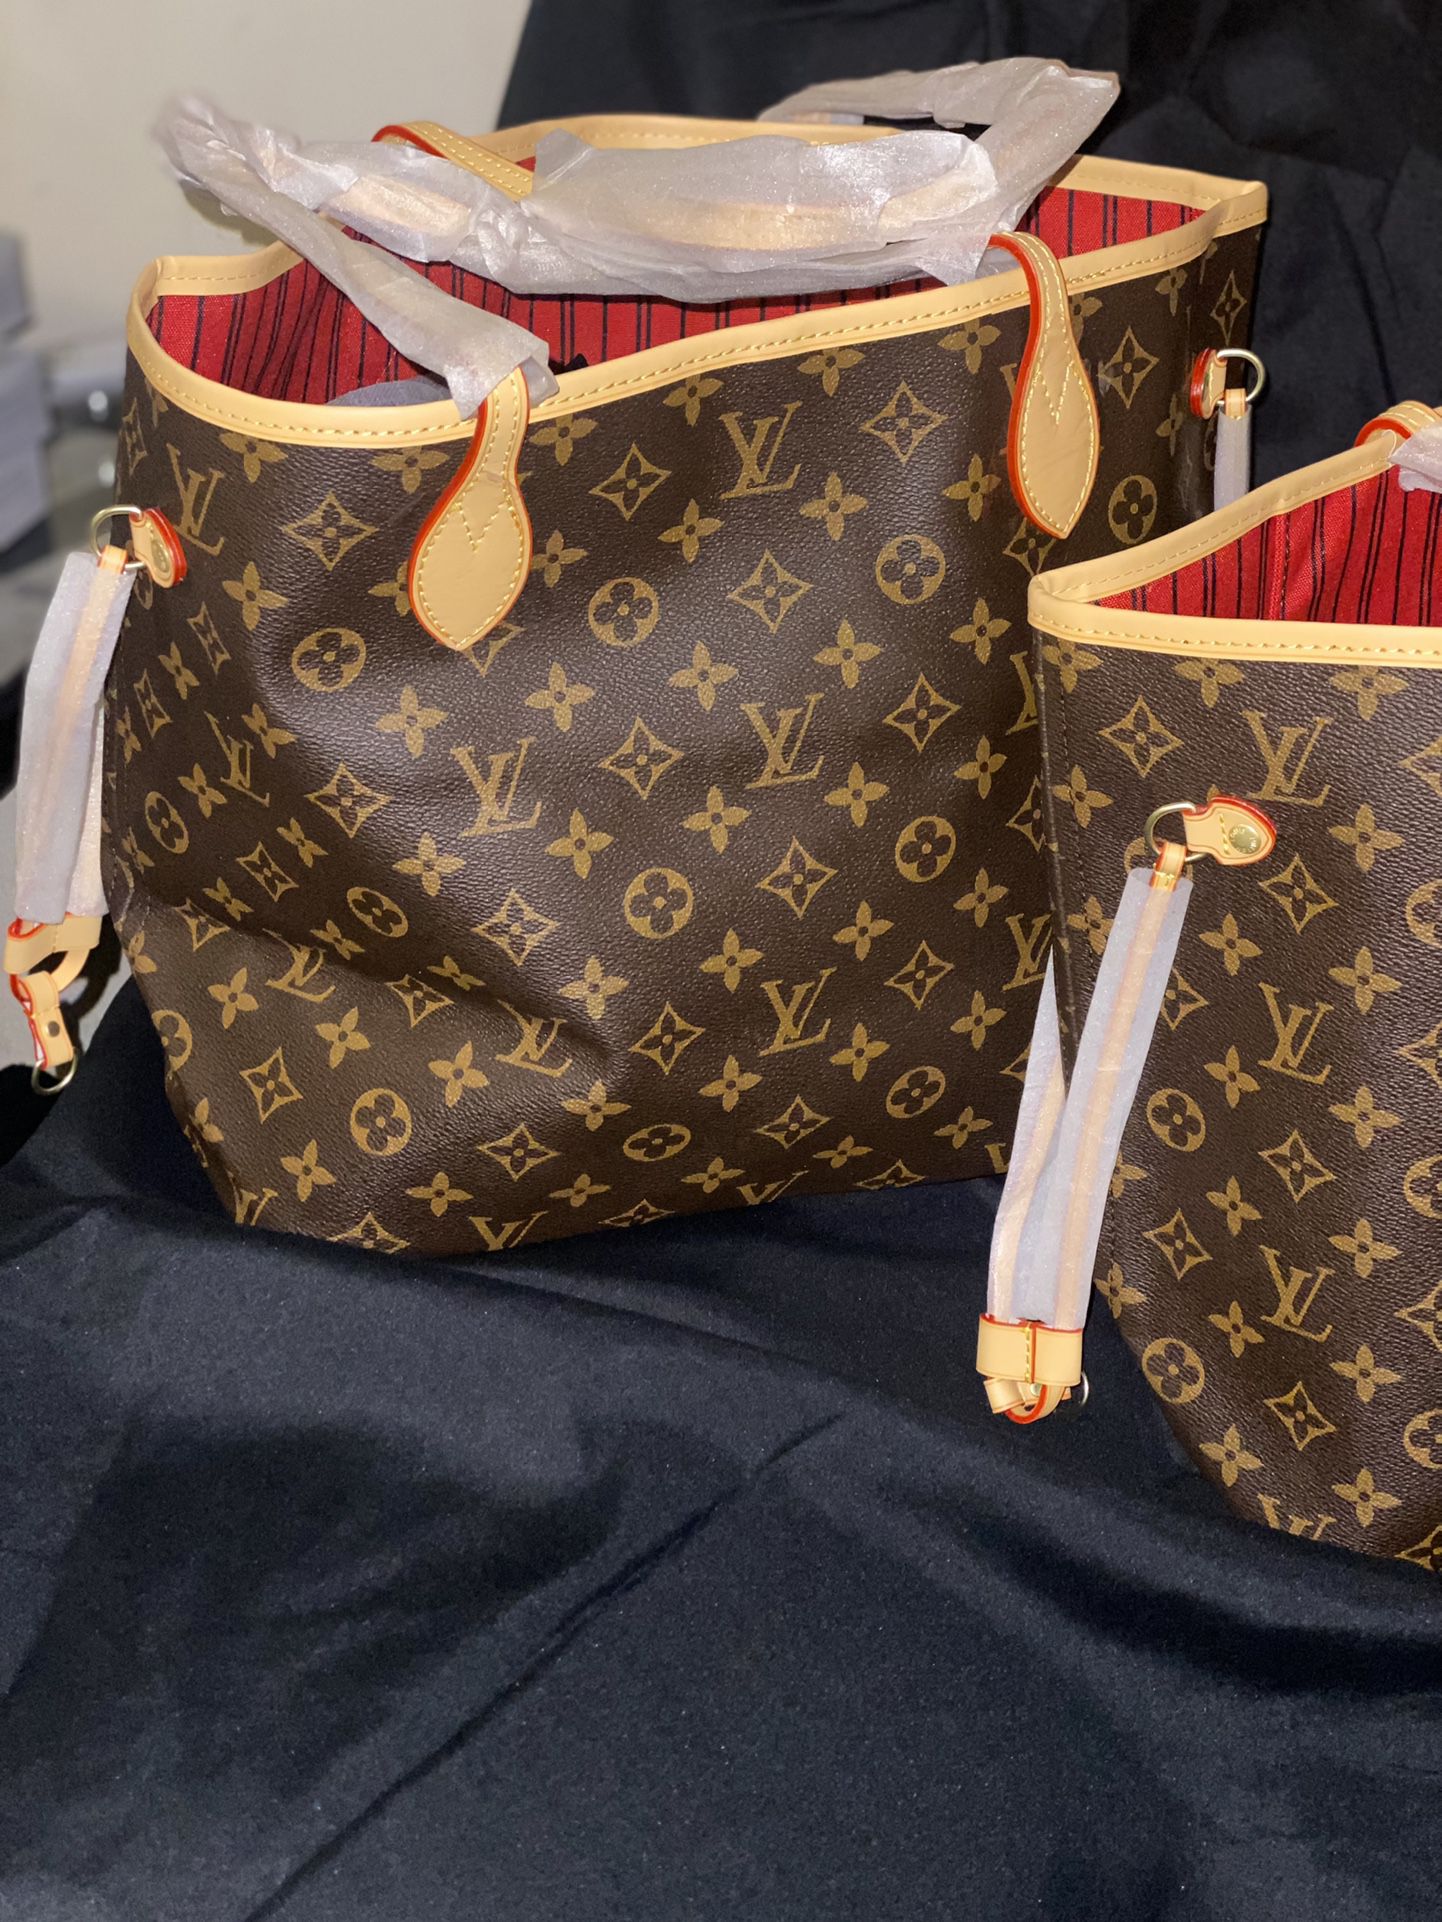 DODGERS DOONEY AND BOURKE for Sale in Fontana, CA - OfferUp